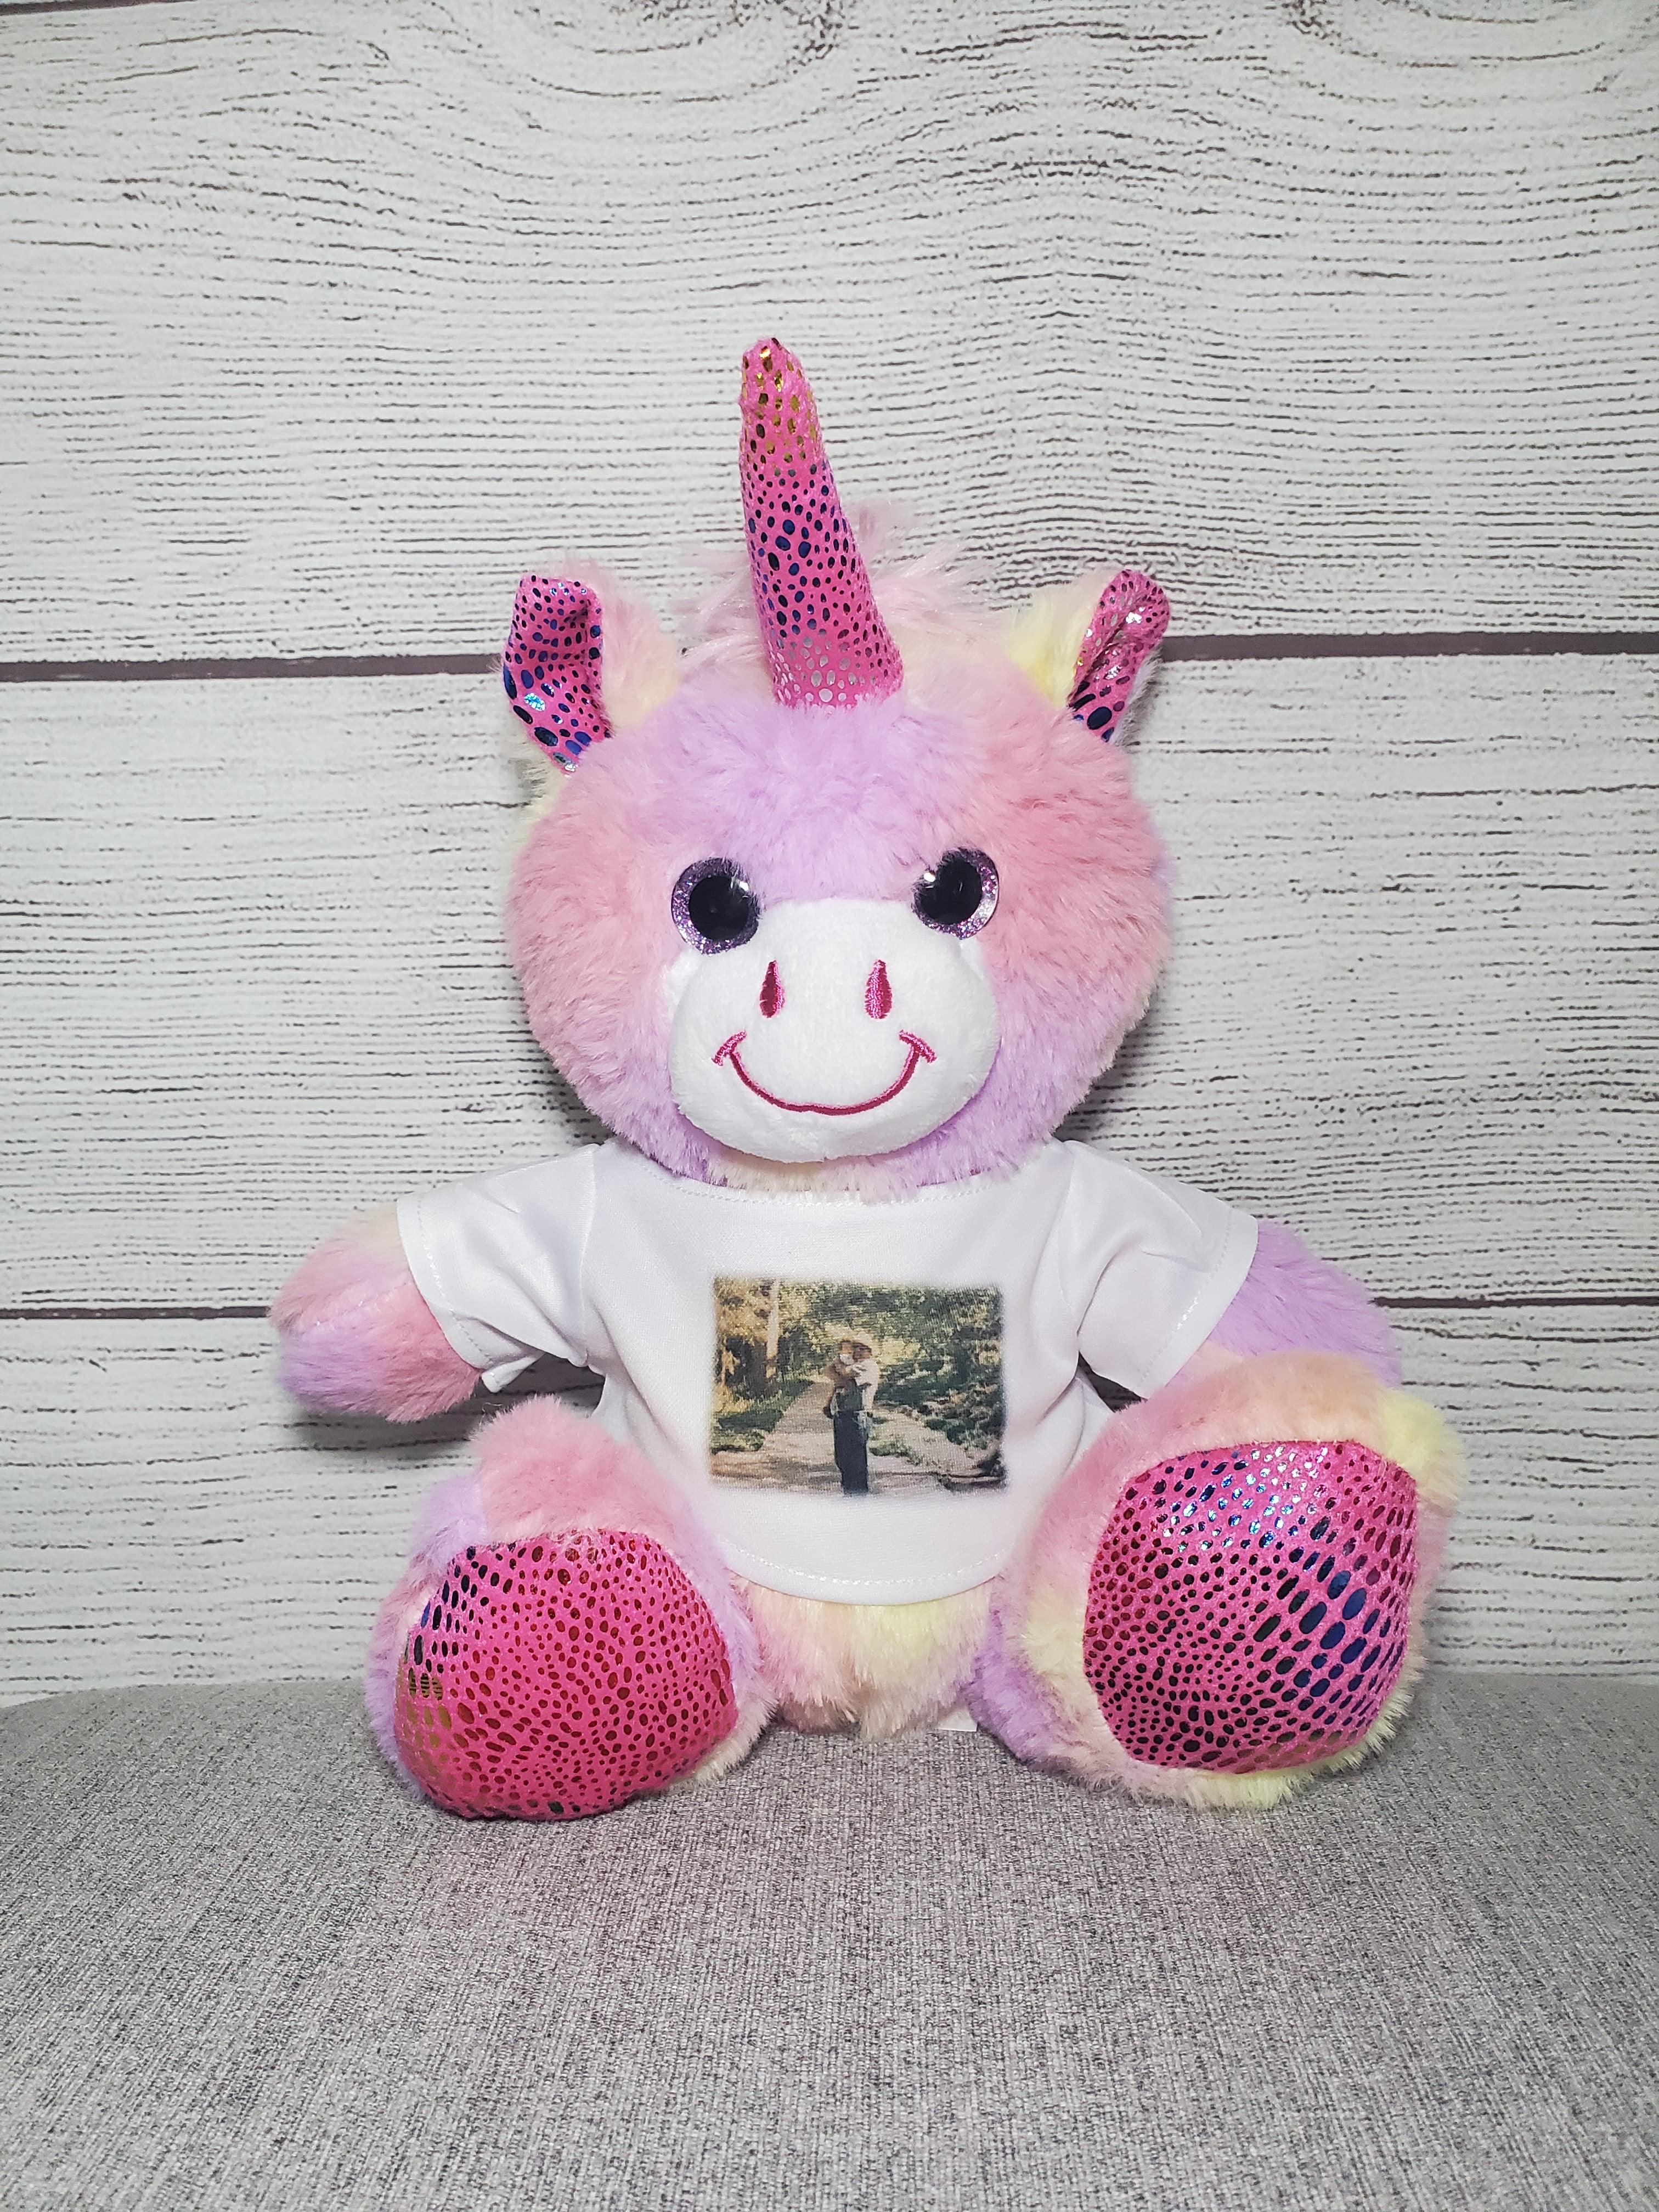 alentines Day , Gifts for Girls, Personalized Teddy Bear or Unicorn, Dad In Heaven Gift, Custom Plus, Custom Plushies, Custom Teddy Bear, Personalized Plushie, Custom Plush Doll, Unicorn Plush, Custom Unicorn Plush, Cute Unique Plush, Girls birthday Party Favors, Birthday Gift for Girls, Gift for child with Sensory Needs and or Autism , Gift for 5 year old Girls | Gift for Girls | Gift for 2 3 4 5 6 year old girls, , Personalized Girls Unicorn Birthday Party Gift, Plush